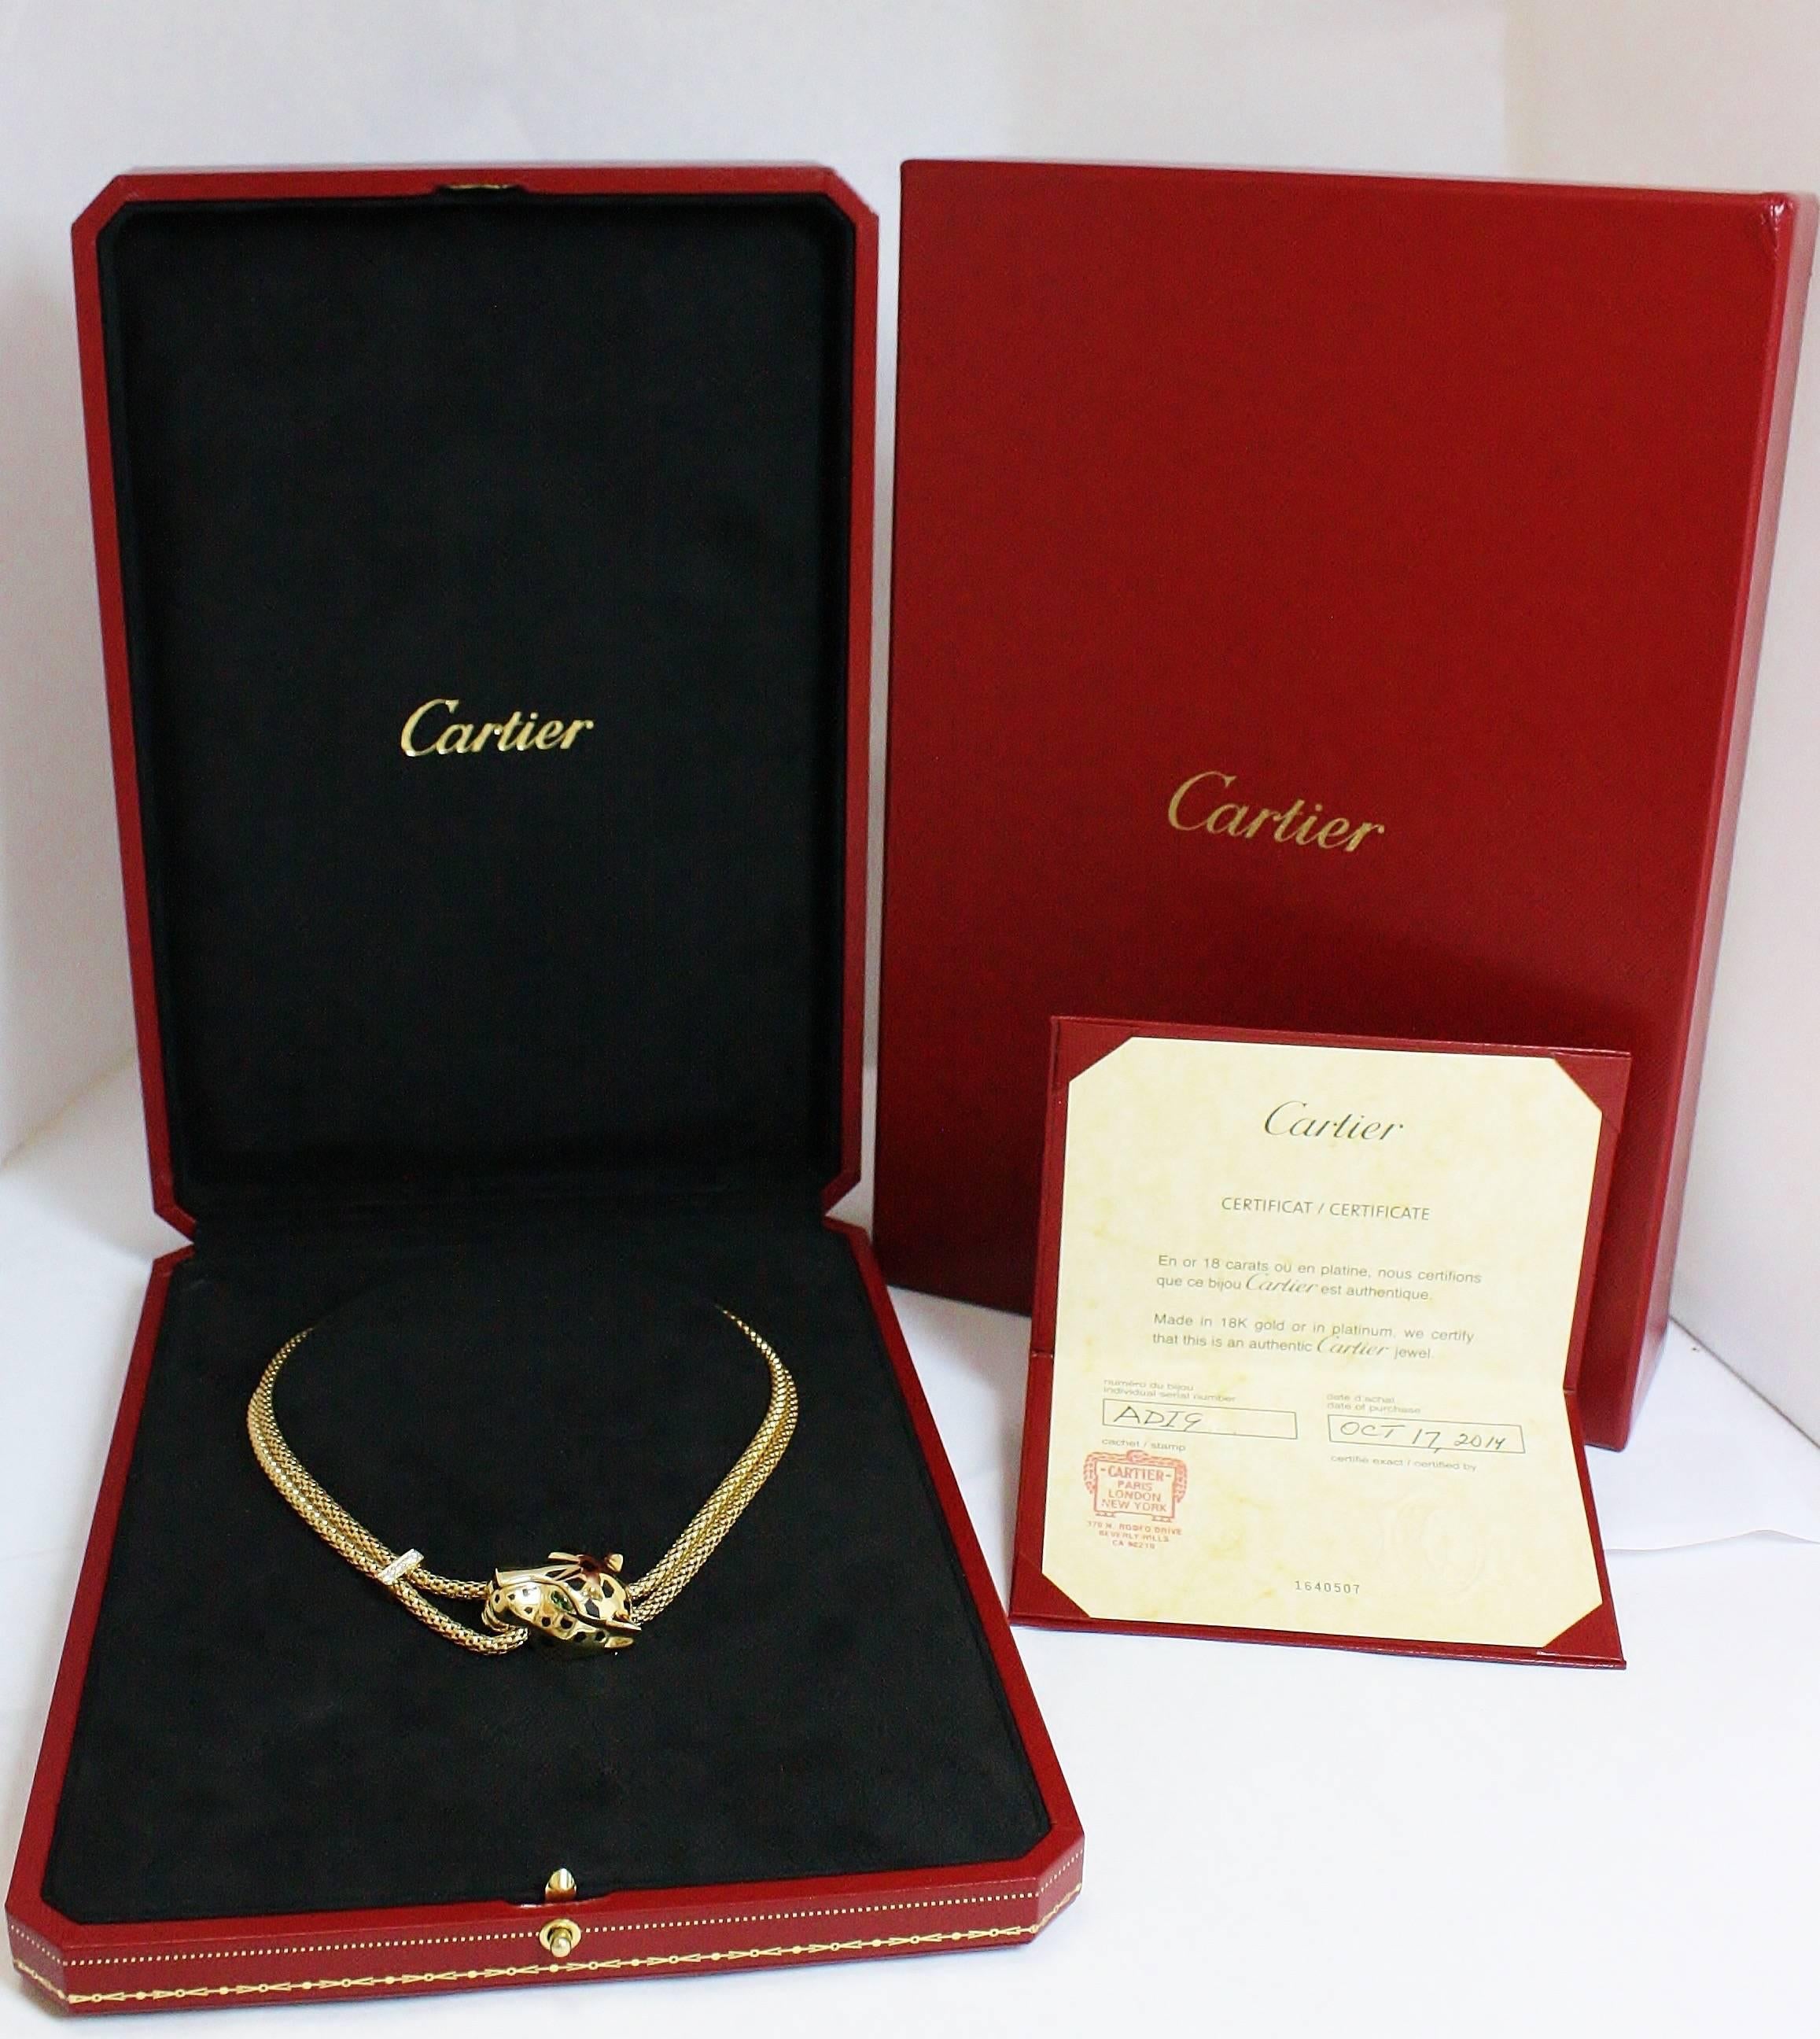 The Panthére De Cartier is a bold contemporary design by Cartier featuring a Panther head clasp connected to an elegant braided chain. The piece stands out as a collar style necklace with the Panther's head and its Tsavorite Garnet Eyes, but can